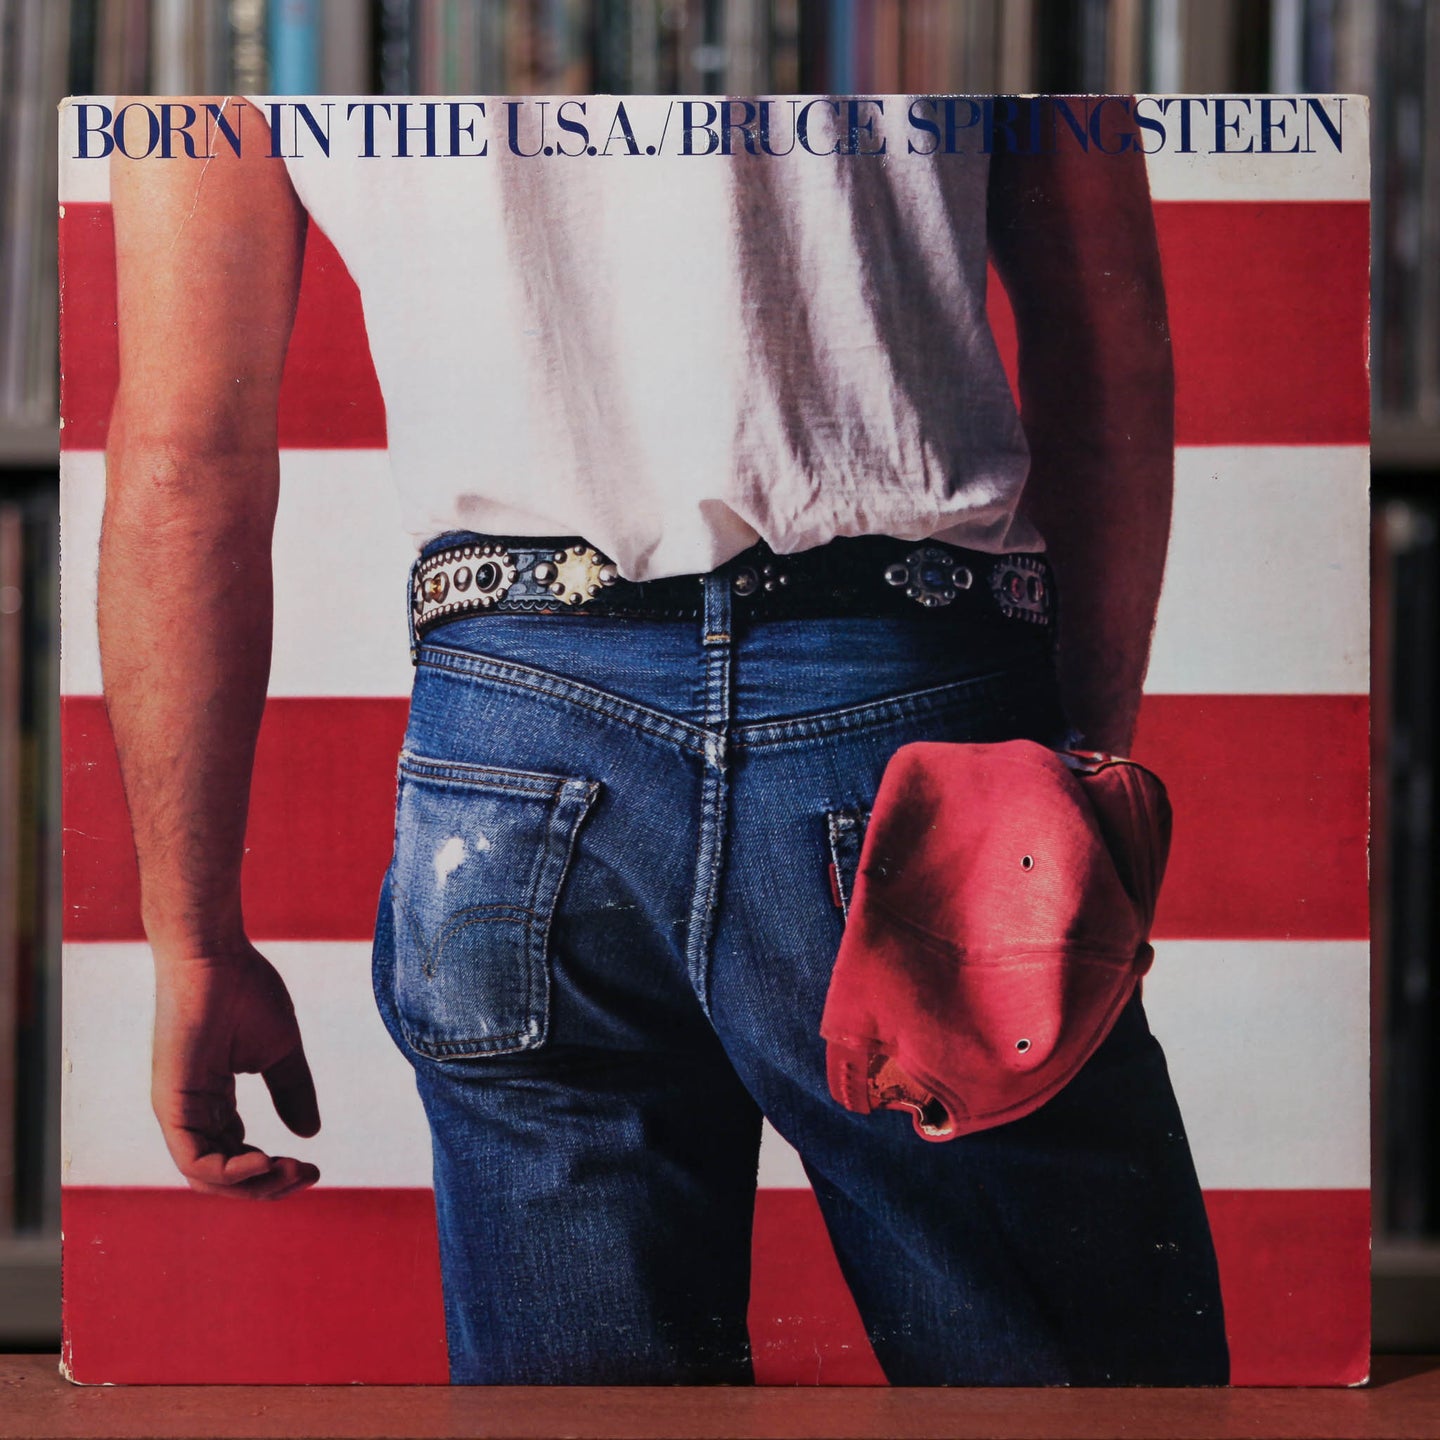 Bruce Springsteen - Born In The U.S.A. - 1984  Columbia, VG/VG